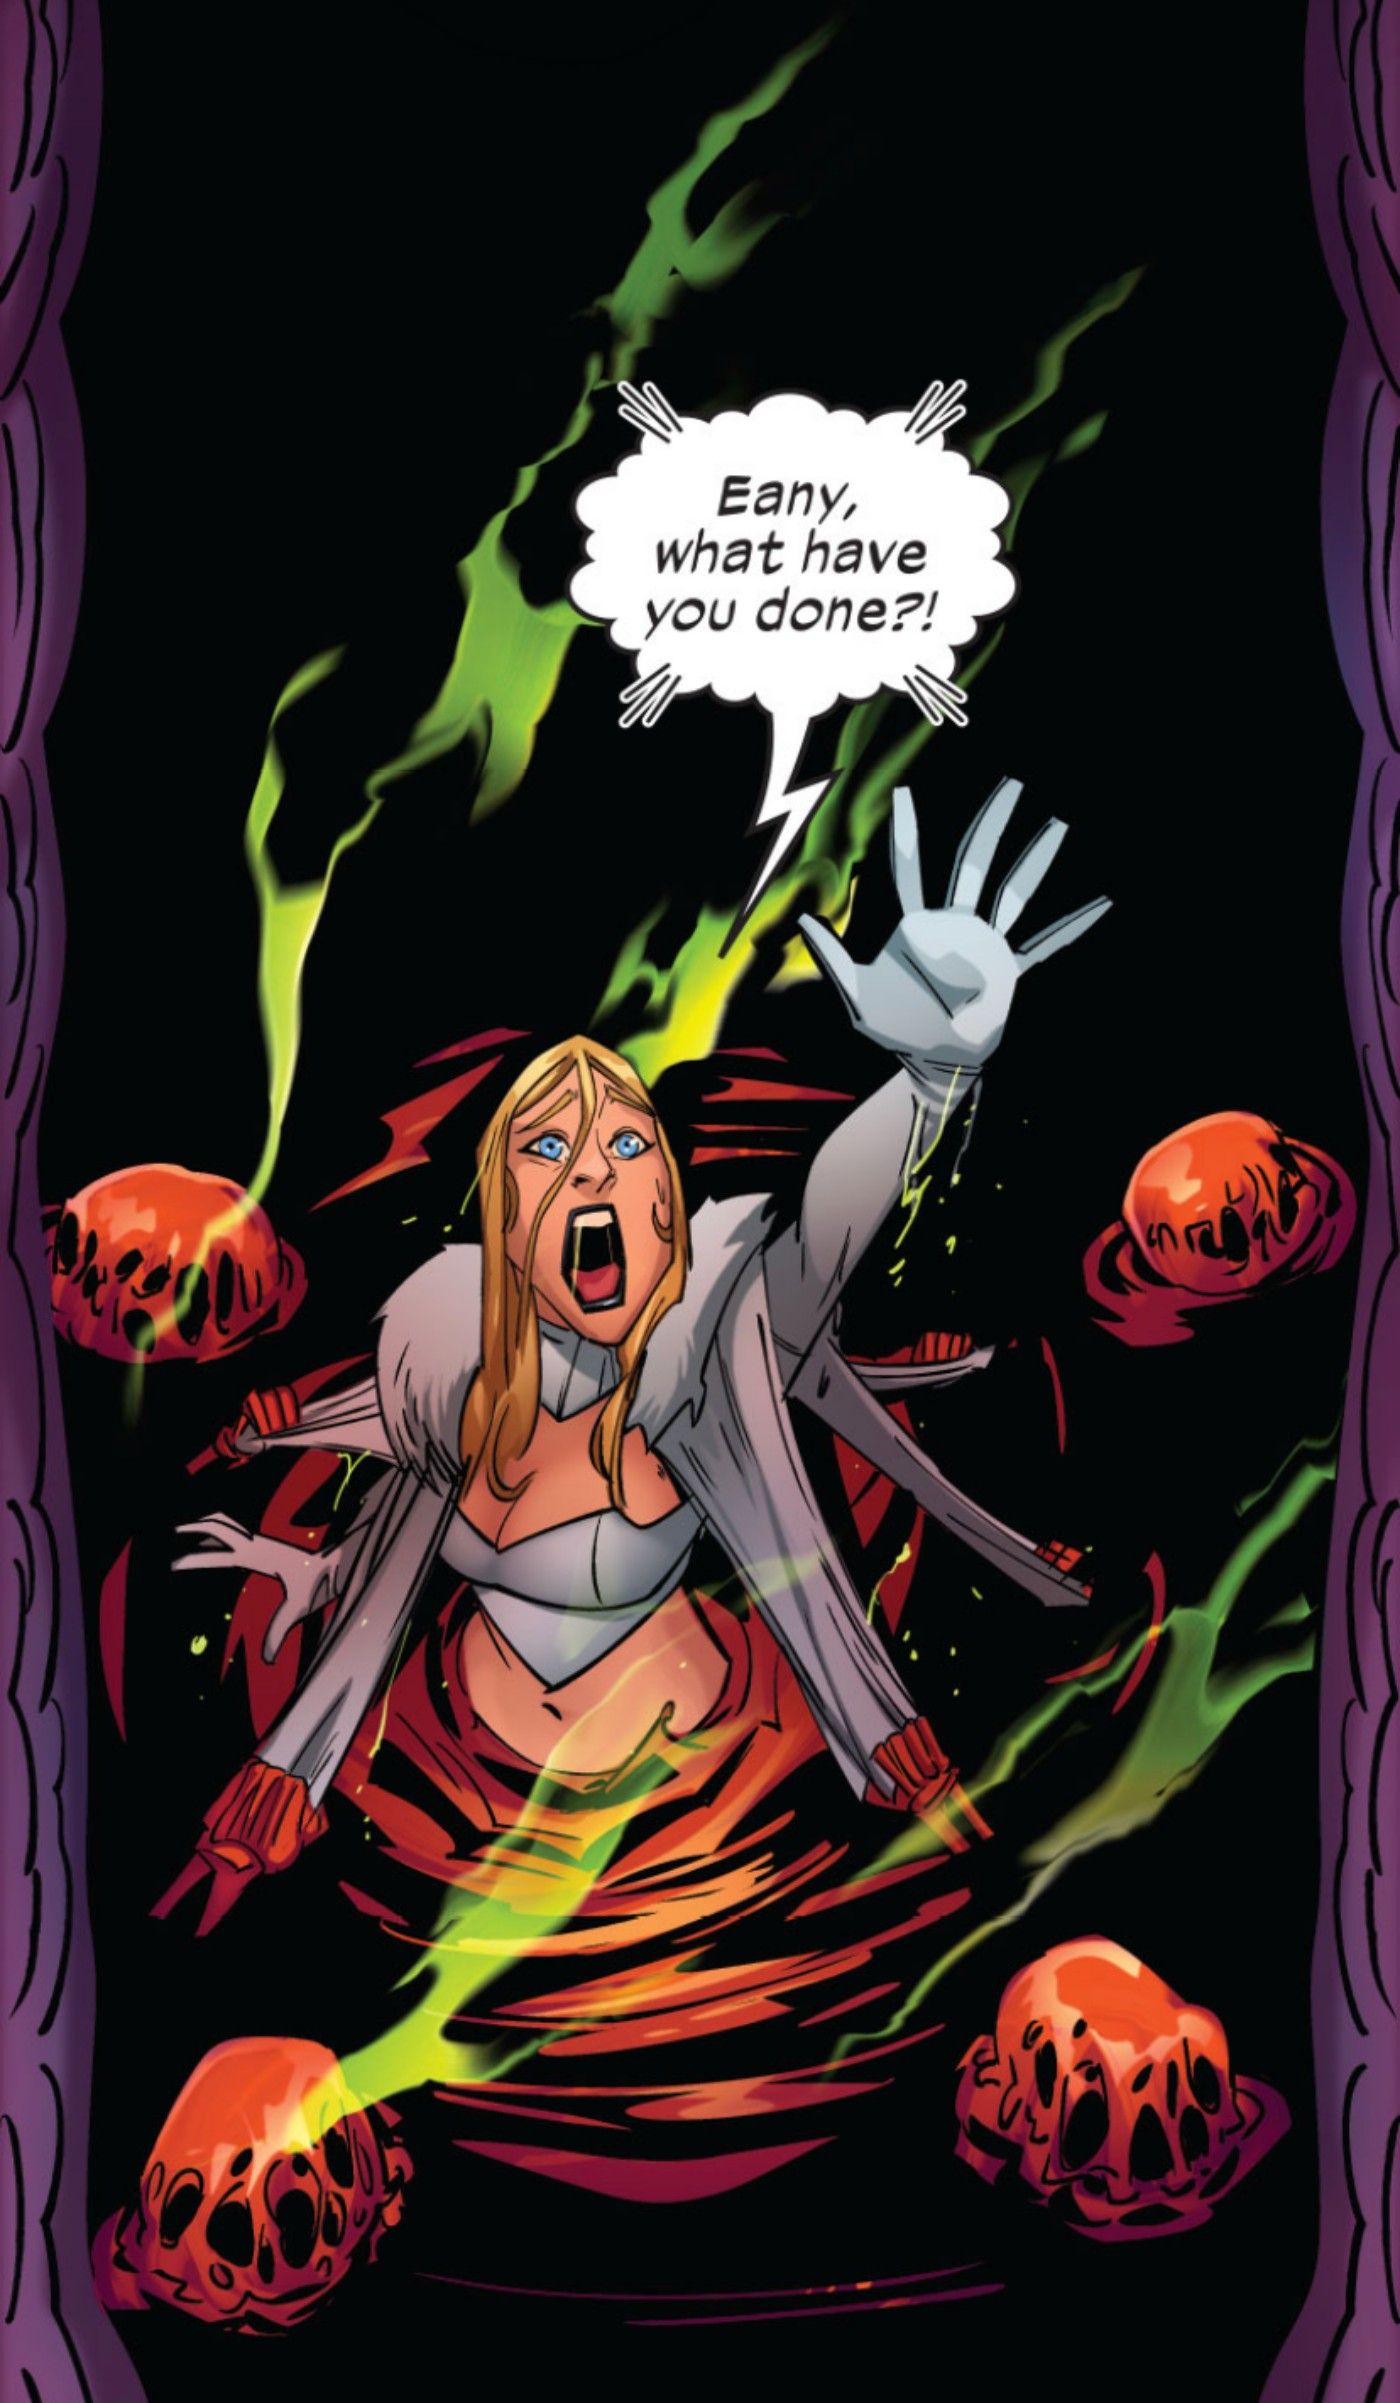 Emma Frost Lost a Psychic Battle to the X-Men’s Weirdest Member Ever